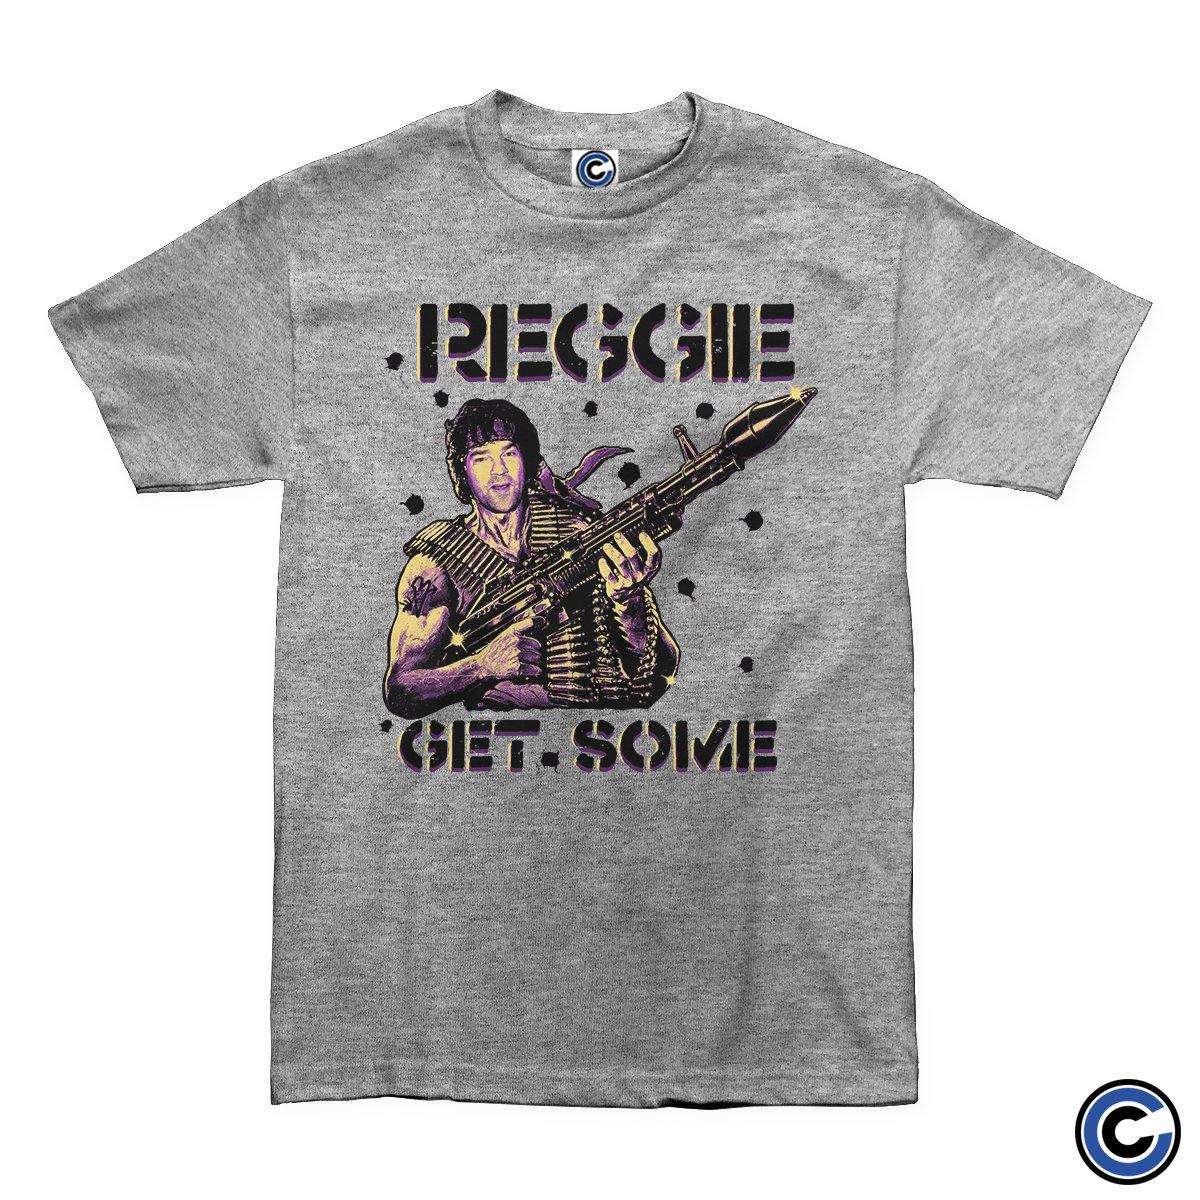 Buy – Reggie and the Full Effect "Get Some" Shirt – Band & Music Merch – Cold Cuts Merch